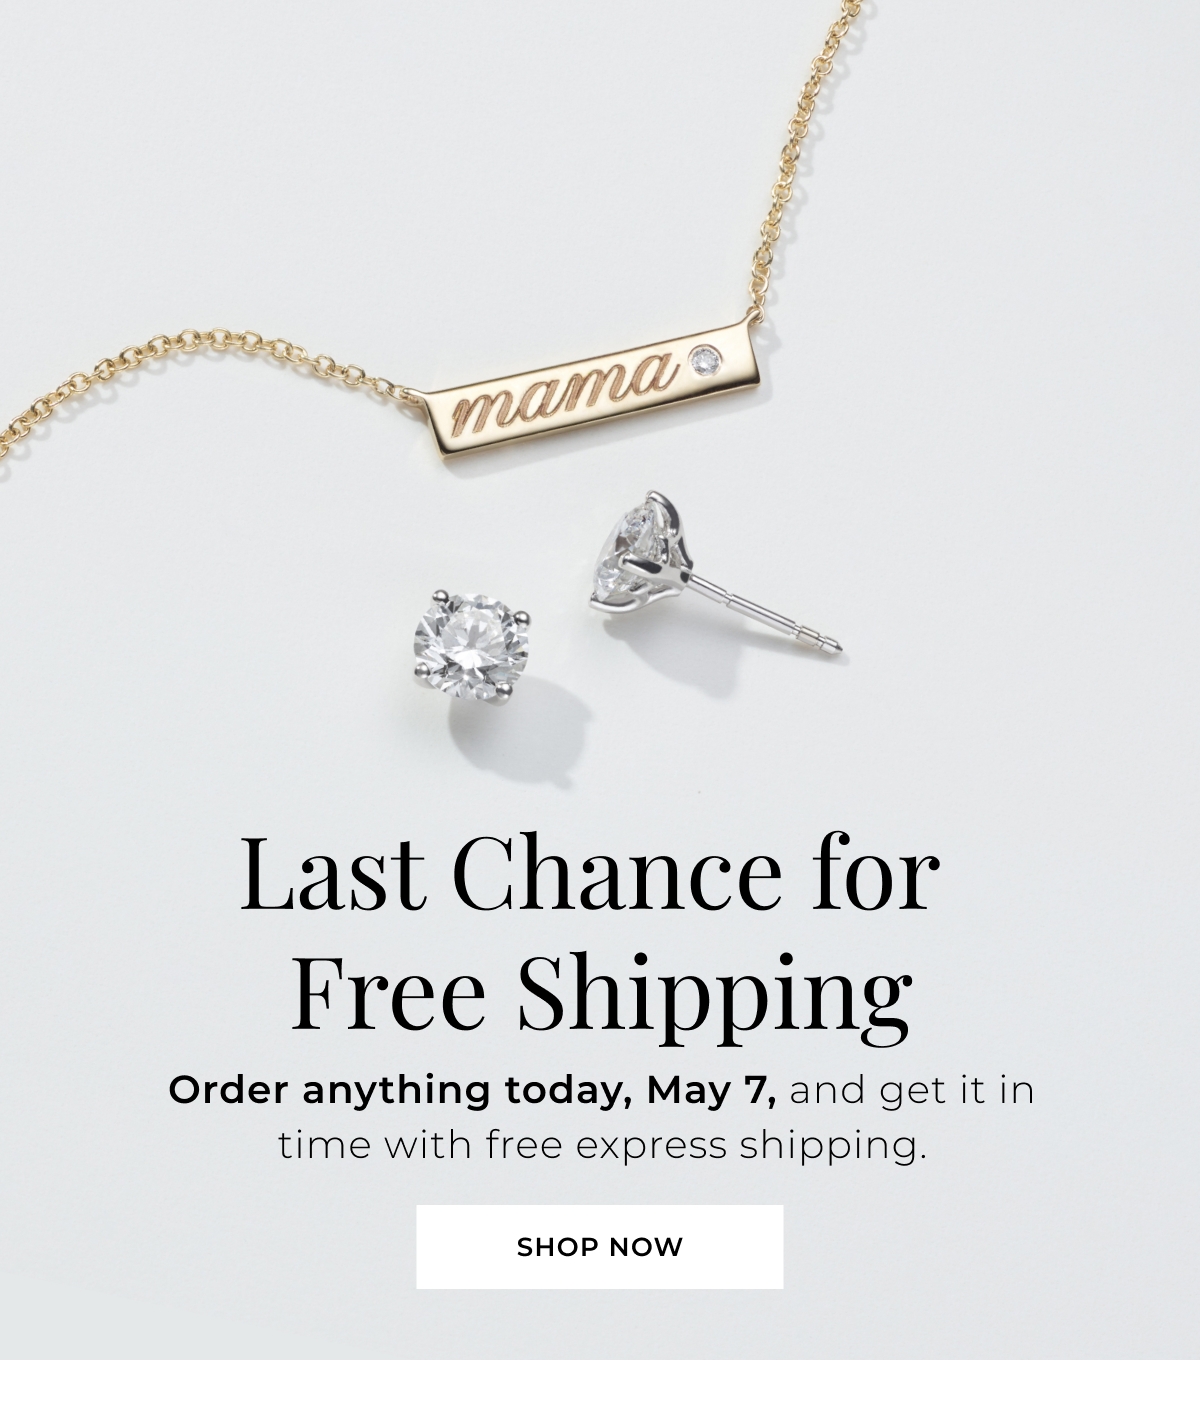 Last Chance for Free Shipping - Order anything today, May 7, and get it in time with free express shipping. Shop Now >